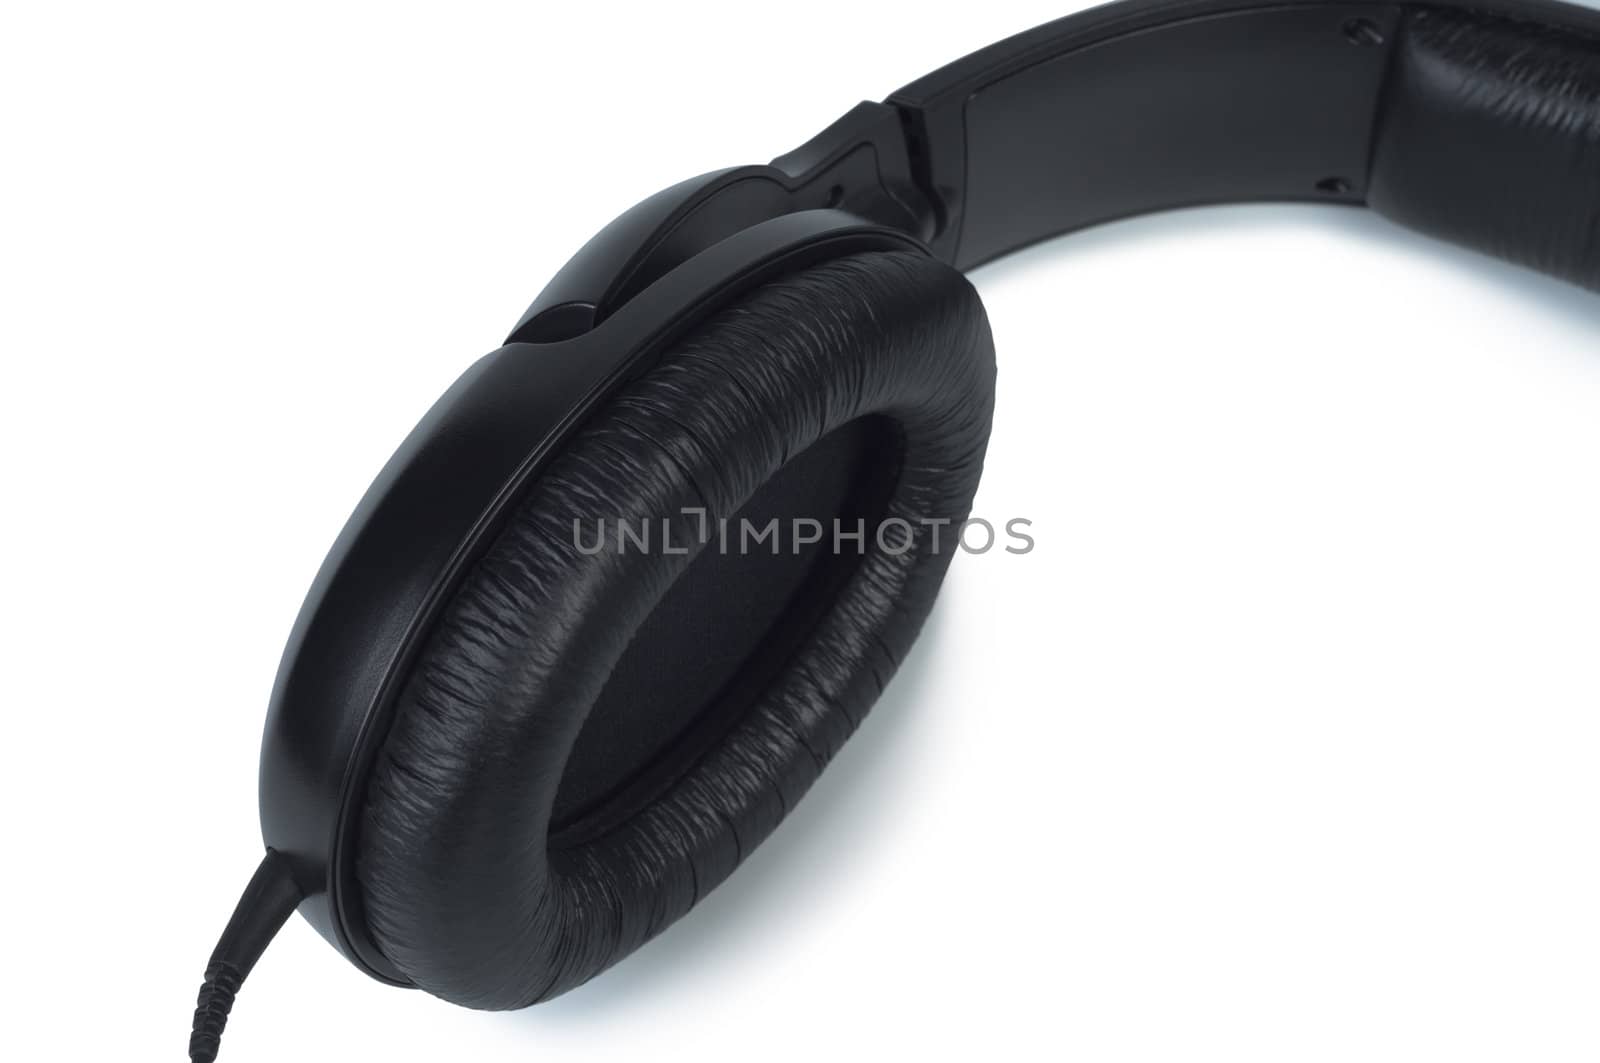 Part headphones with leather embouchure close-up on white background.